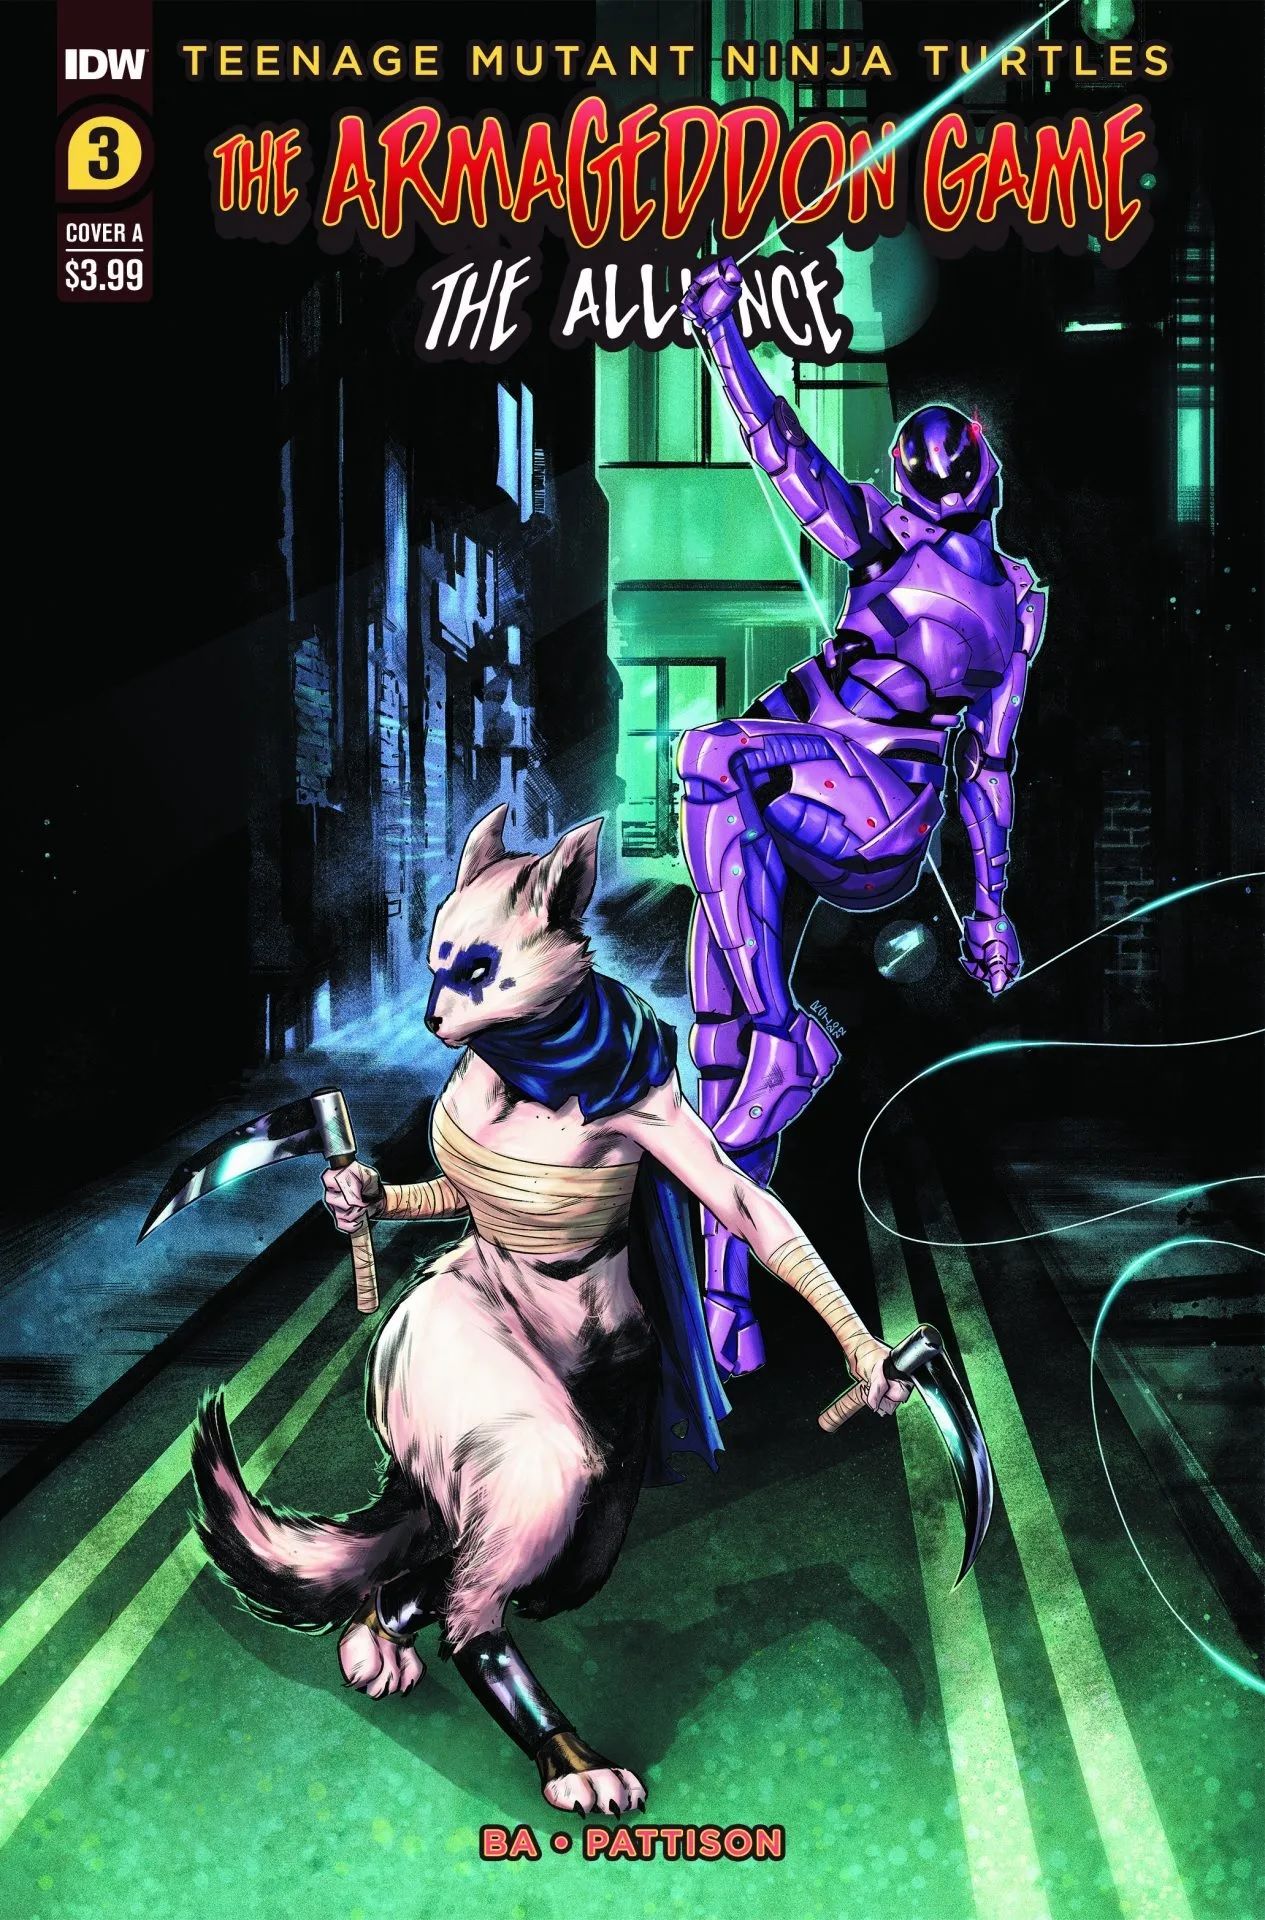 TMNT The Armageddon Game - The Alliance 3 Cover